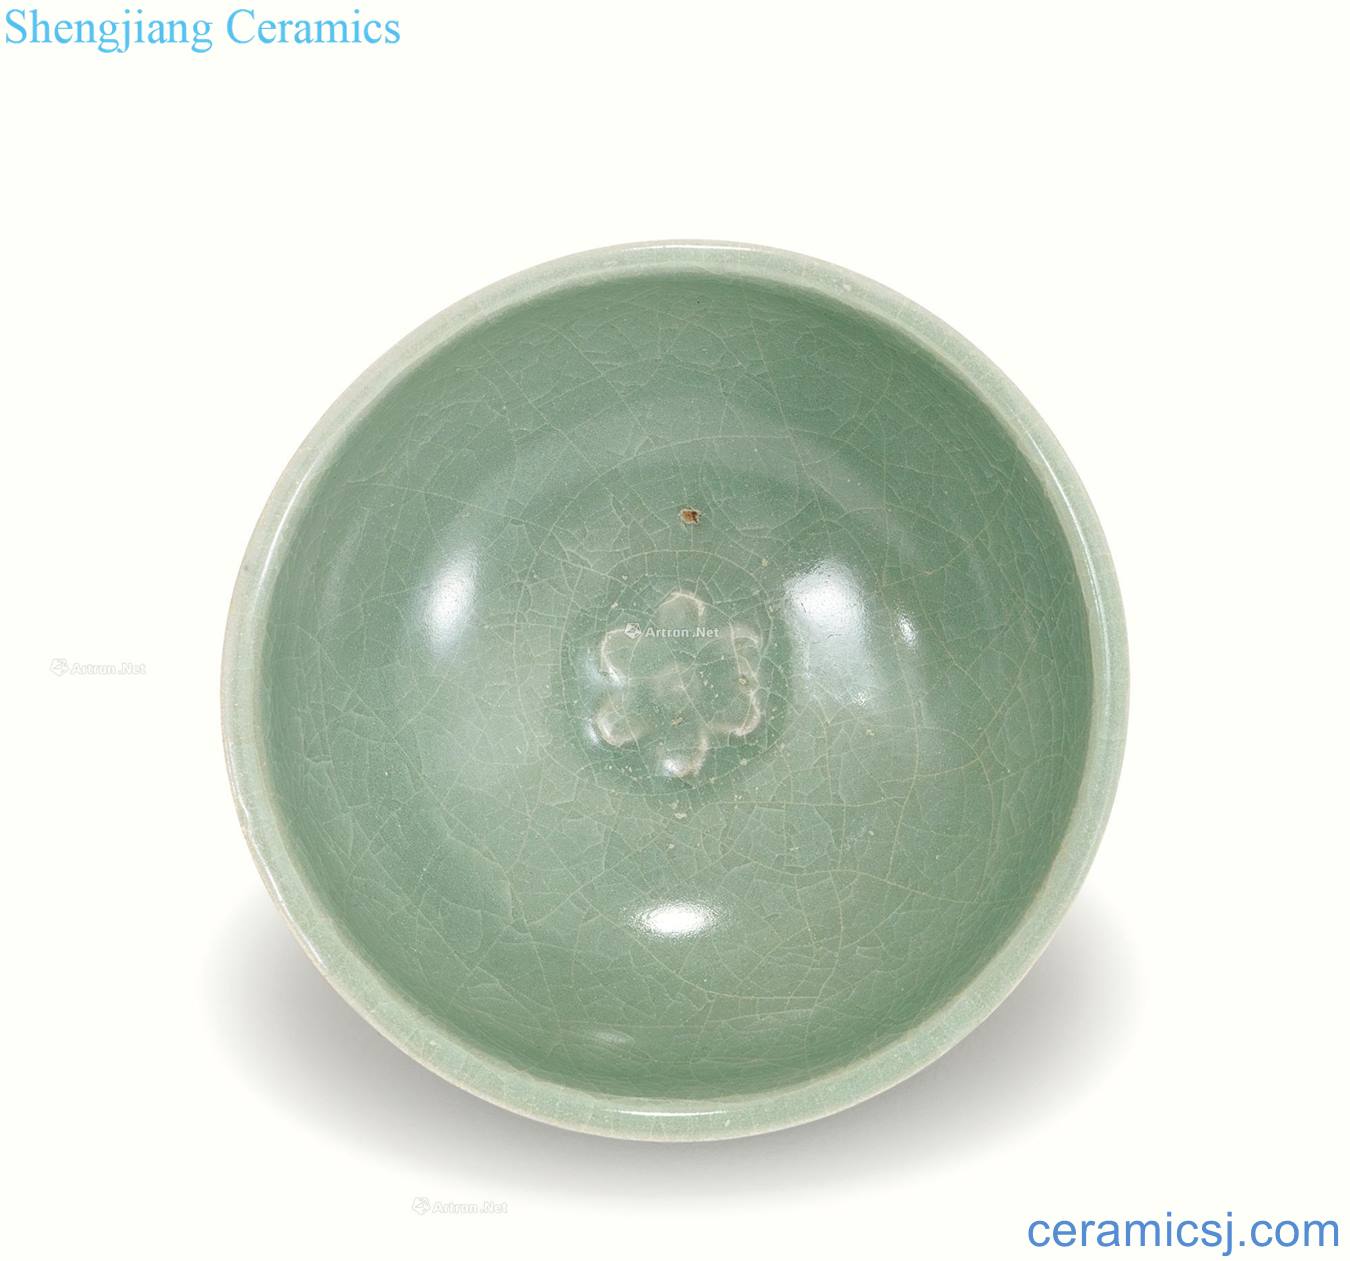 The southern song dynasty Longquan celadon glaze plum flower small cup